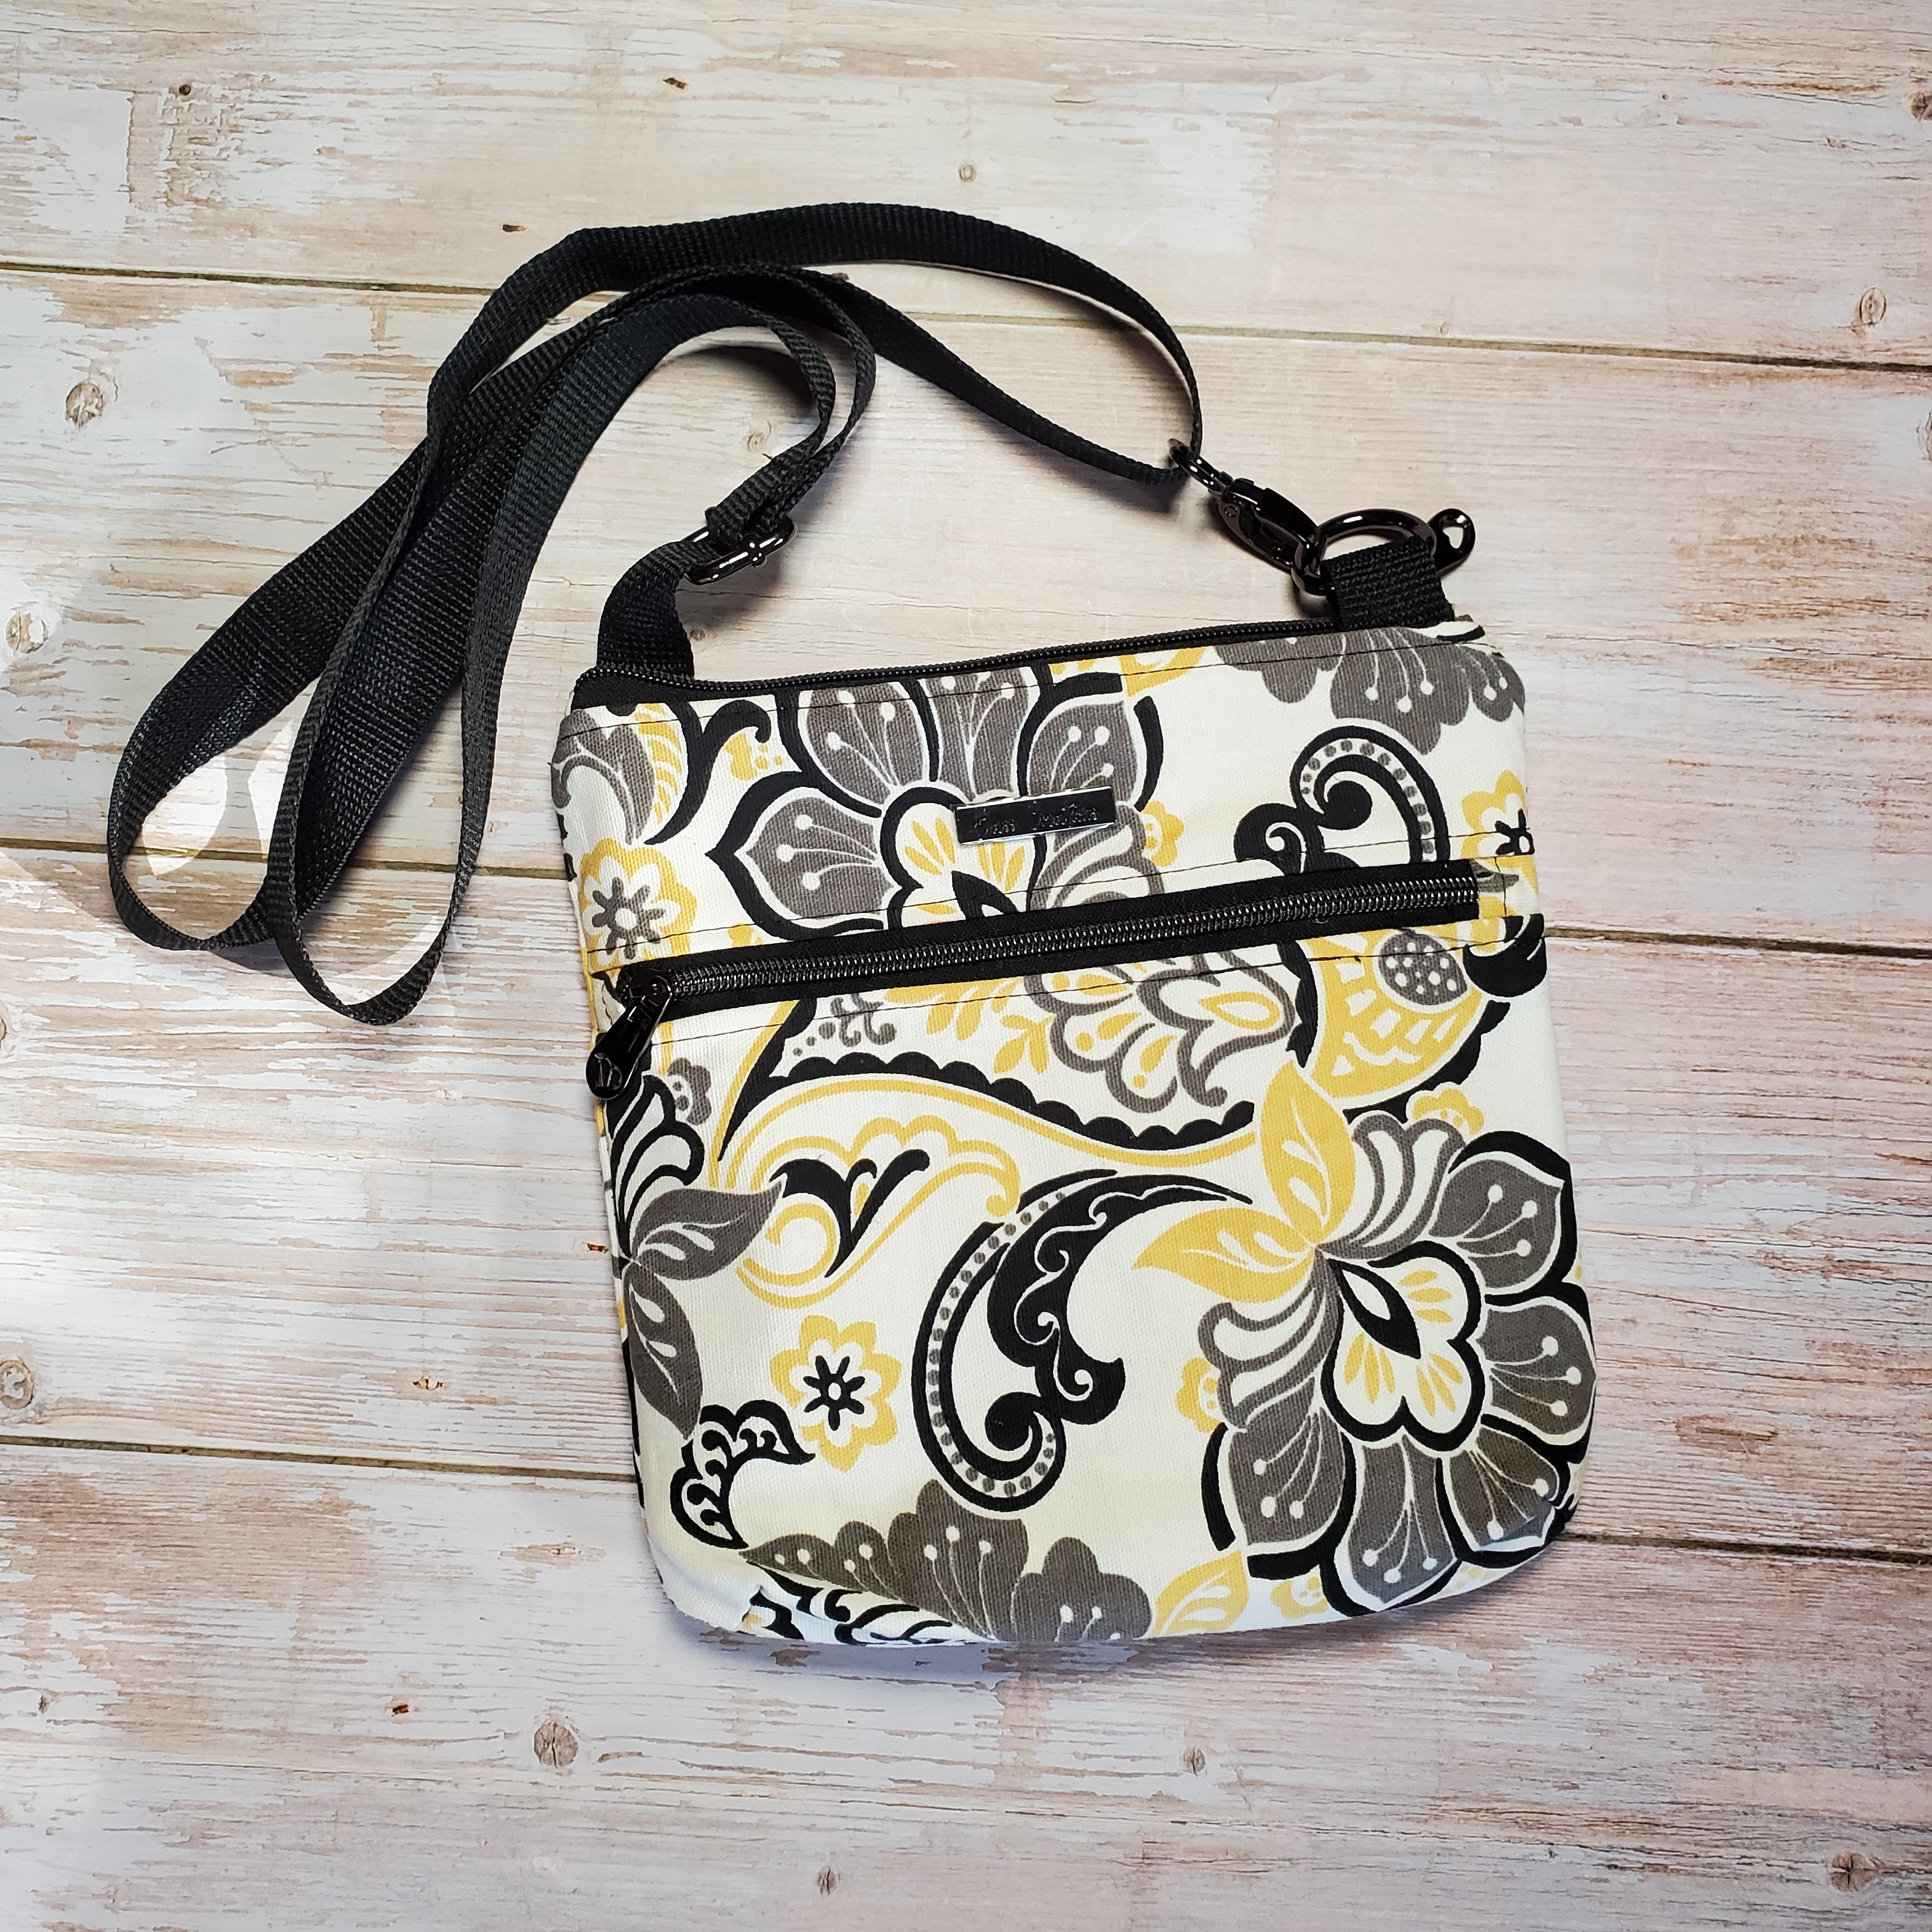 Top view of a yellow, gray and black medium crossbody with gunmetal zippers and a gunmetal Bass Creations logo.